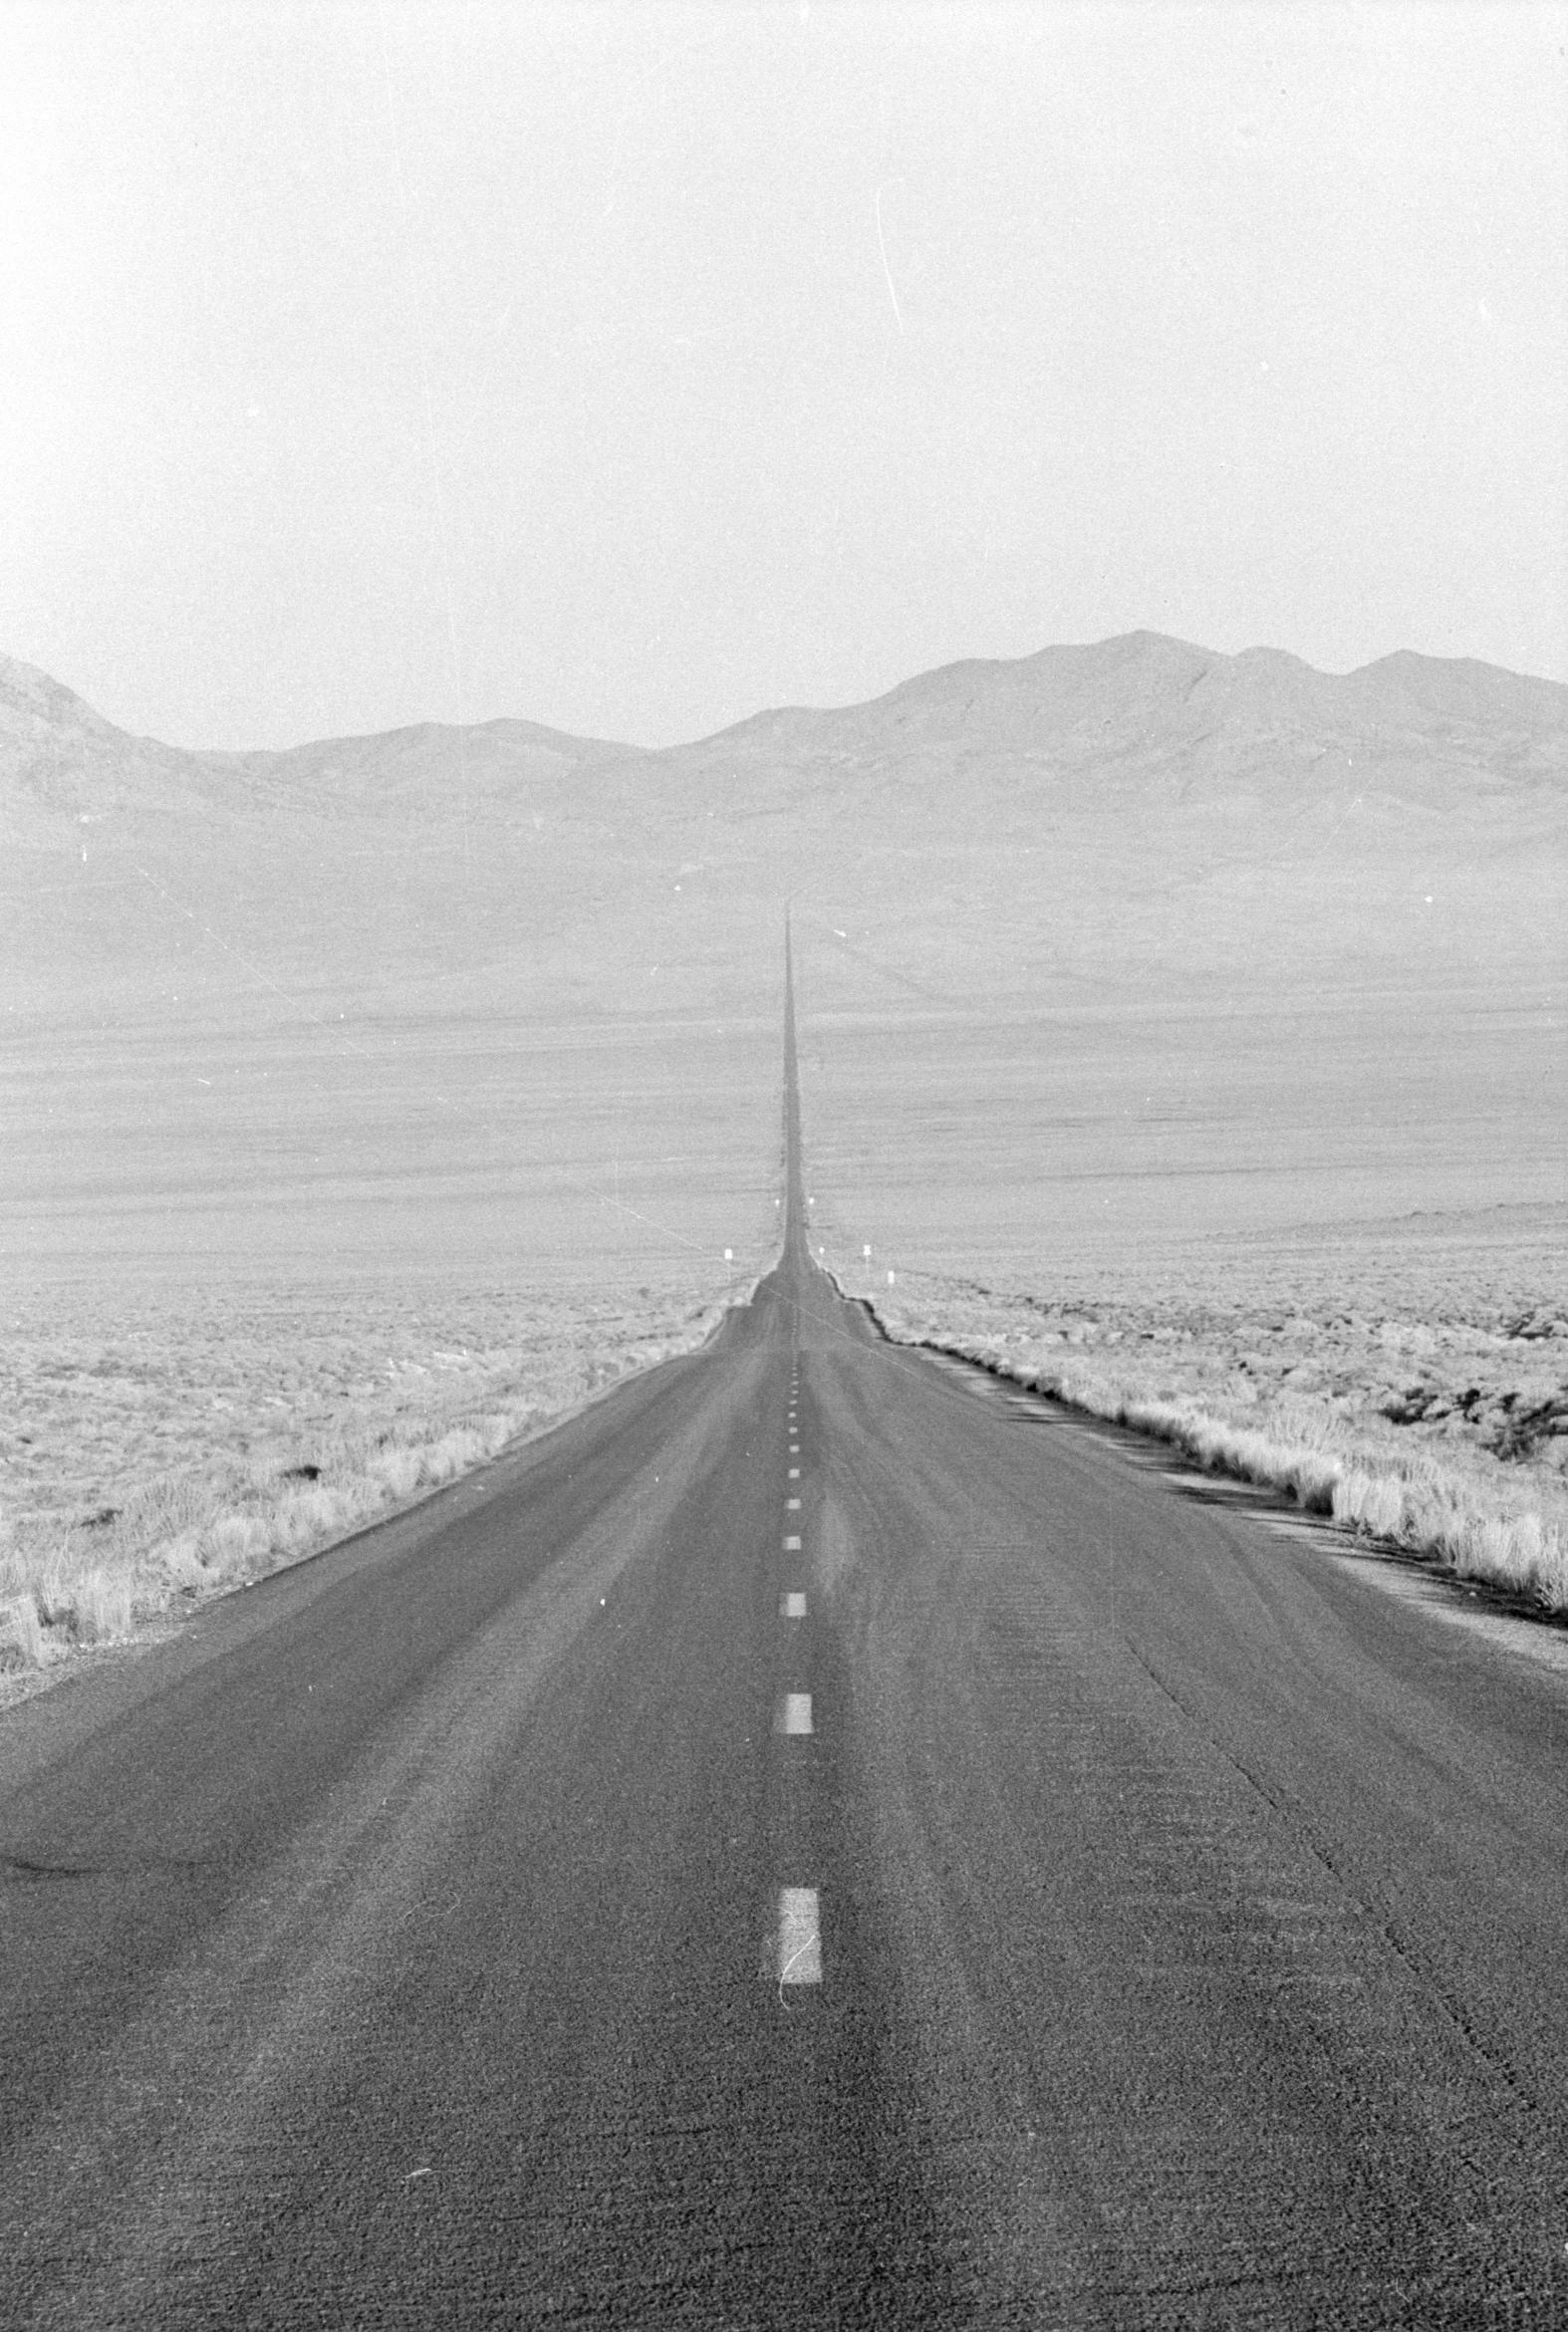 a long empty road stretches into mountains in the distance